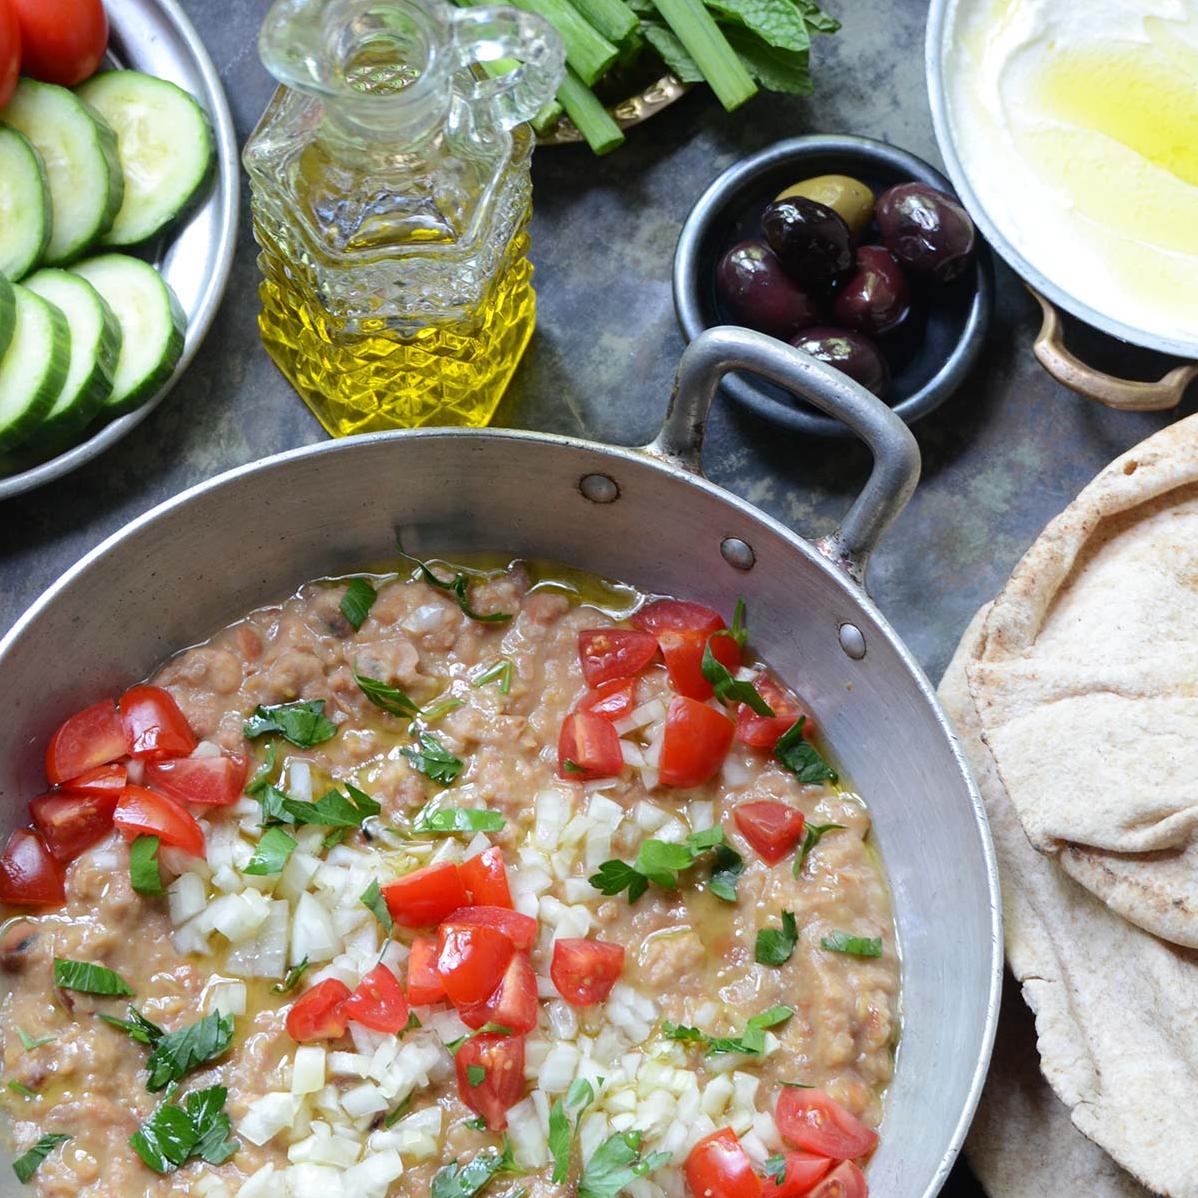  Don't let the simple ingredients fool you - this dip packs a flavorful punch.